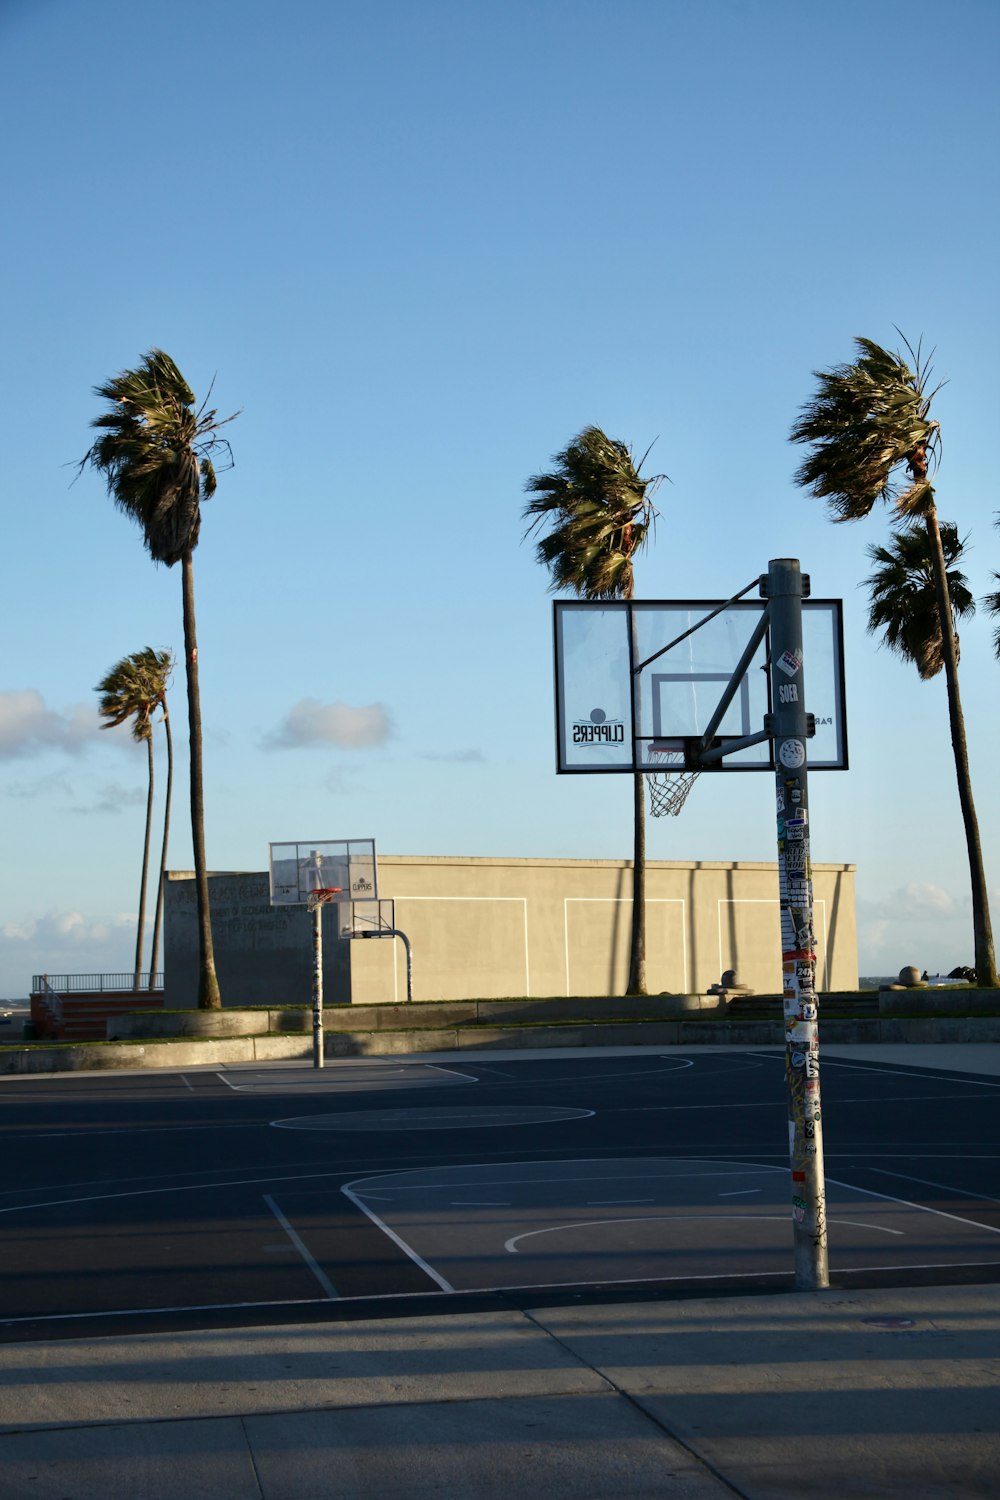 a basketball court with palm trees in the background